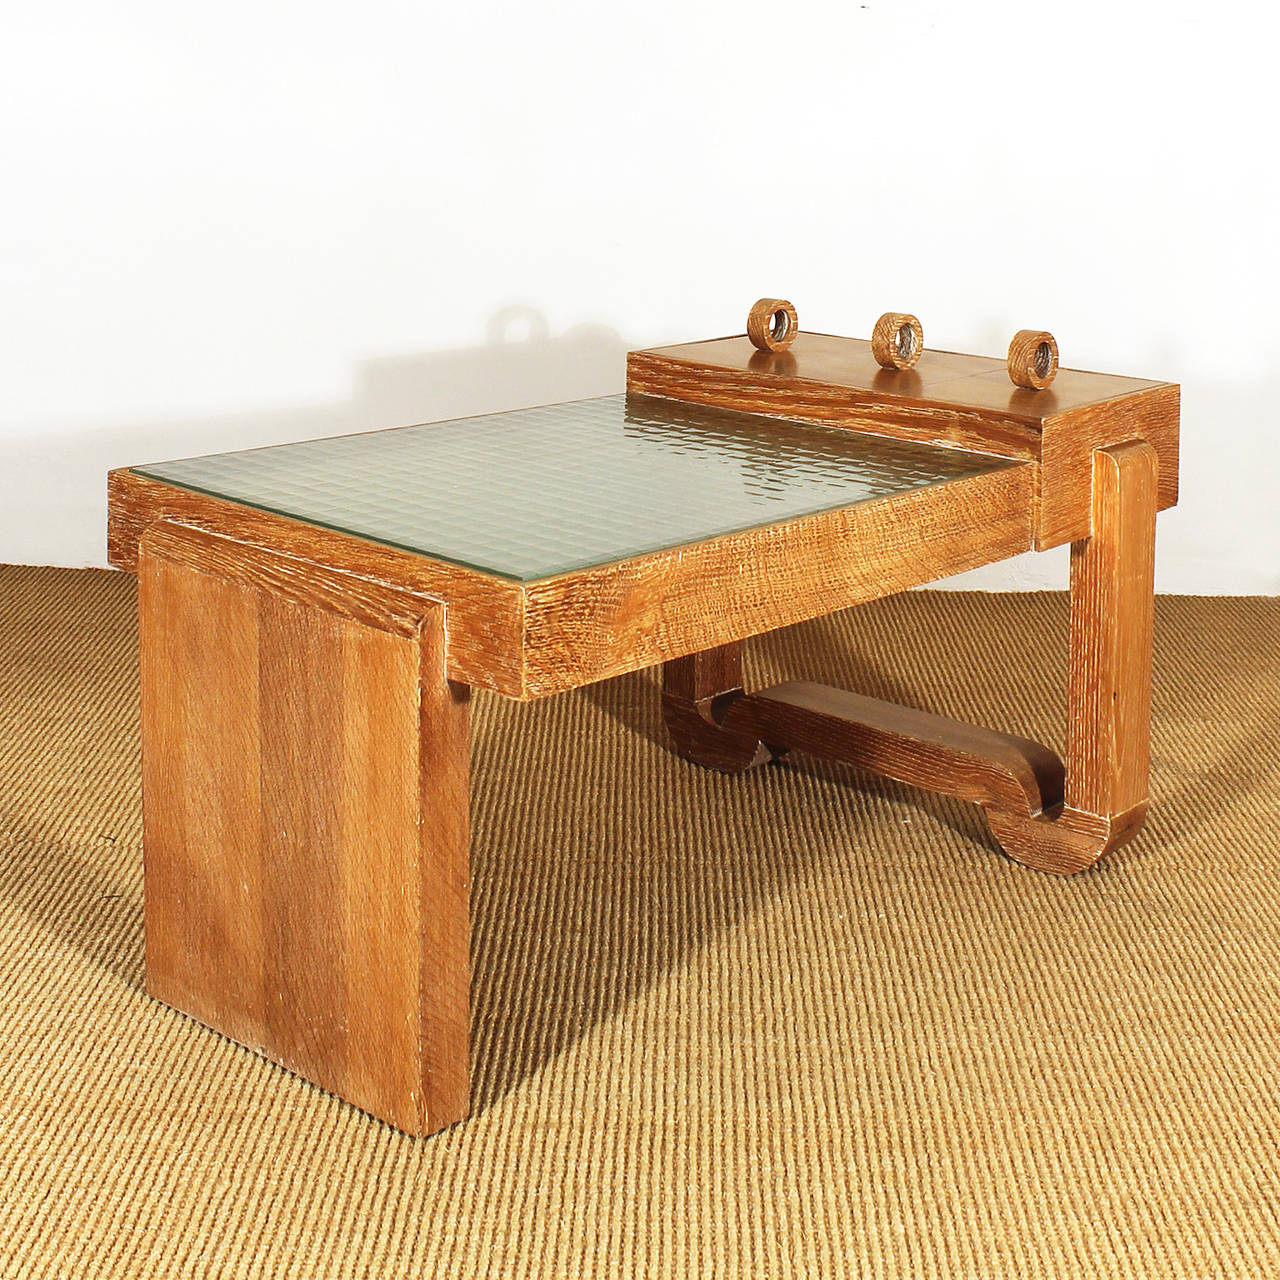 Rectangular coffee table, cerused light oak wood, reinforced glass and 3 